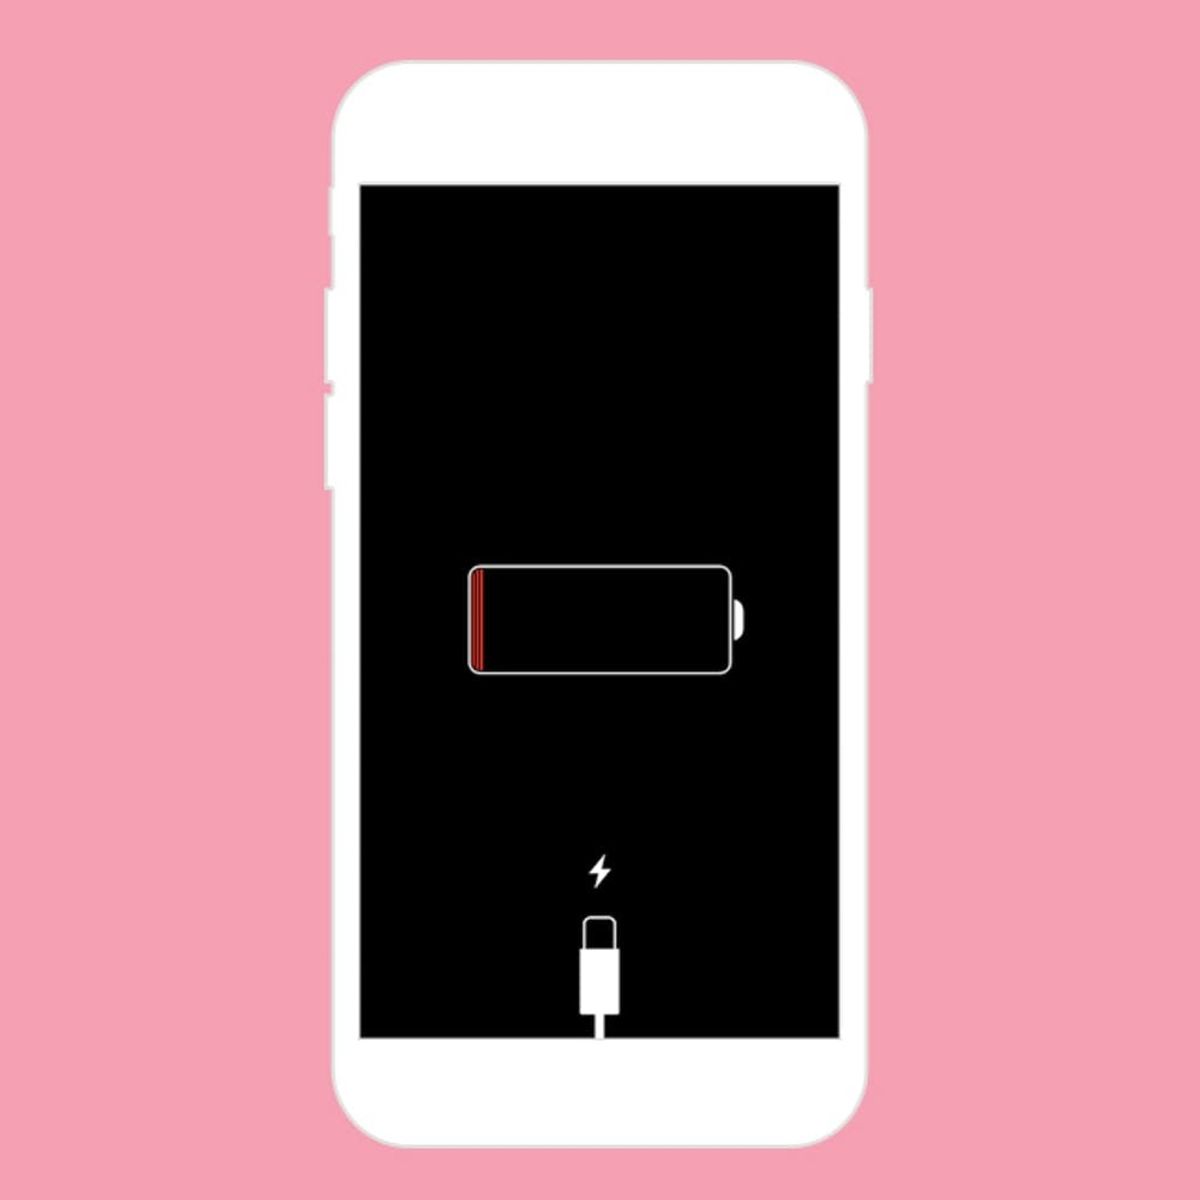 If Your iPhone Isn’t Charging, This Might Be the Easy Fix